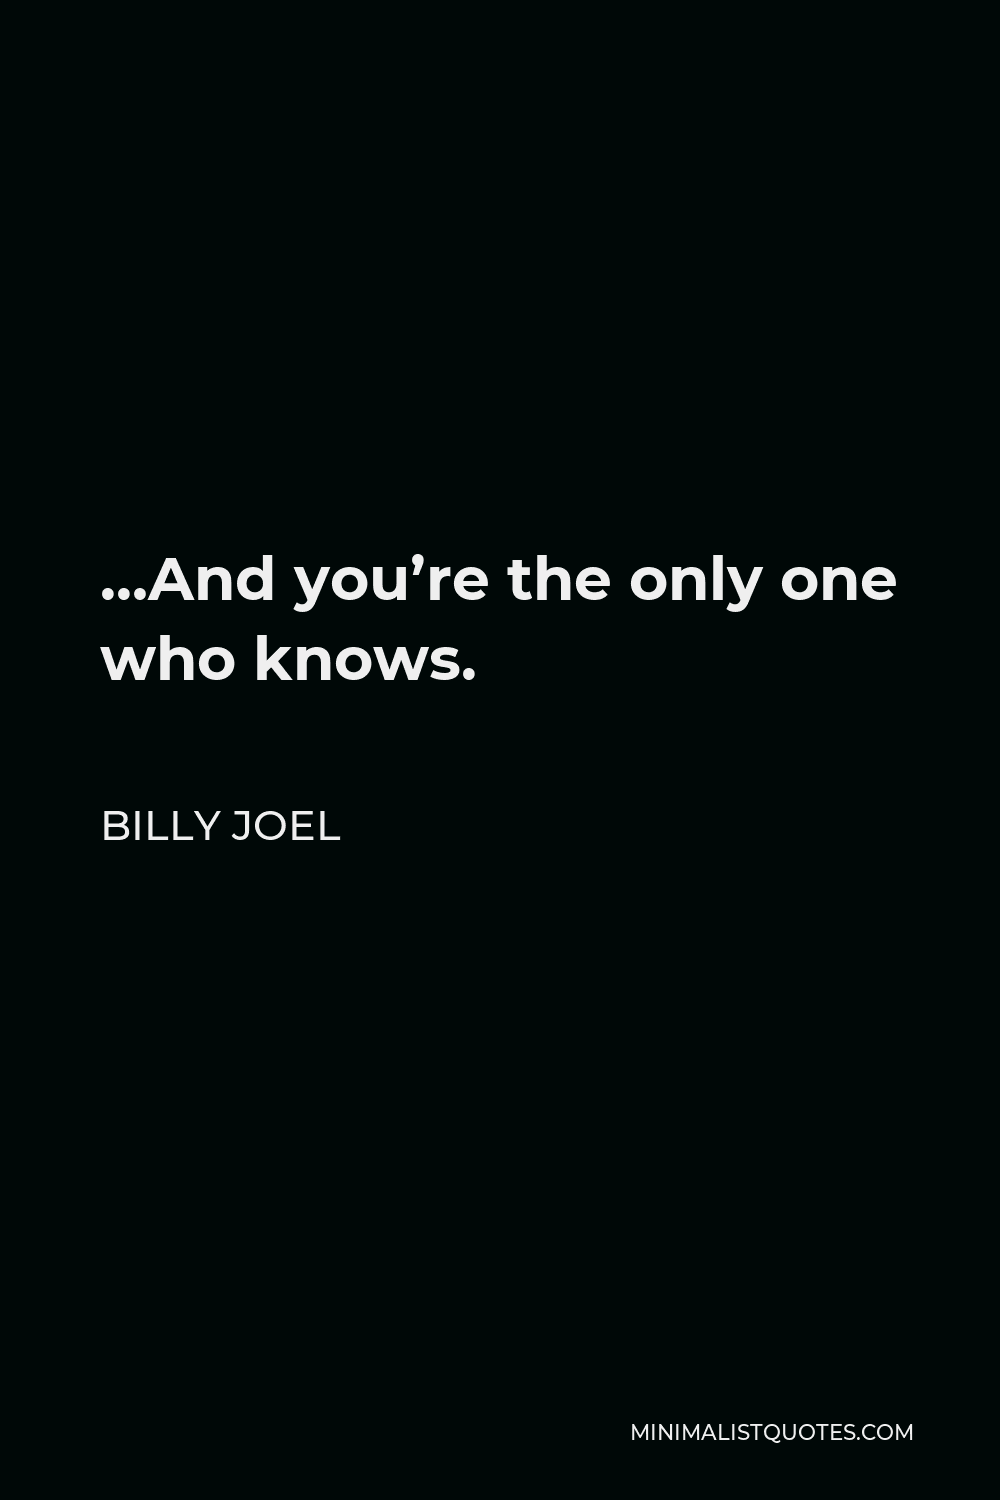 Billy Joel Quote - …And you’re the only one who knows.